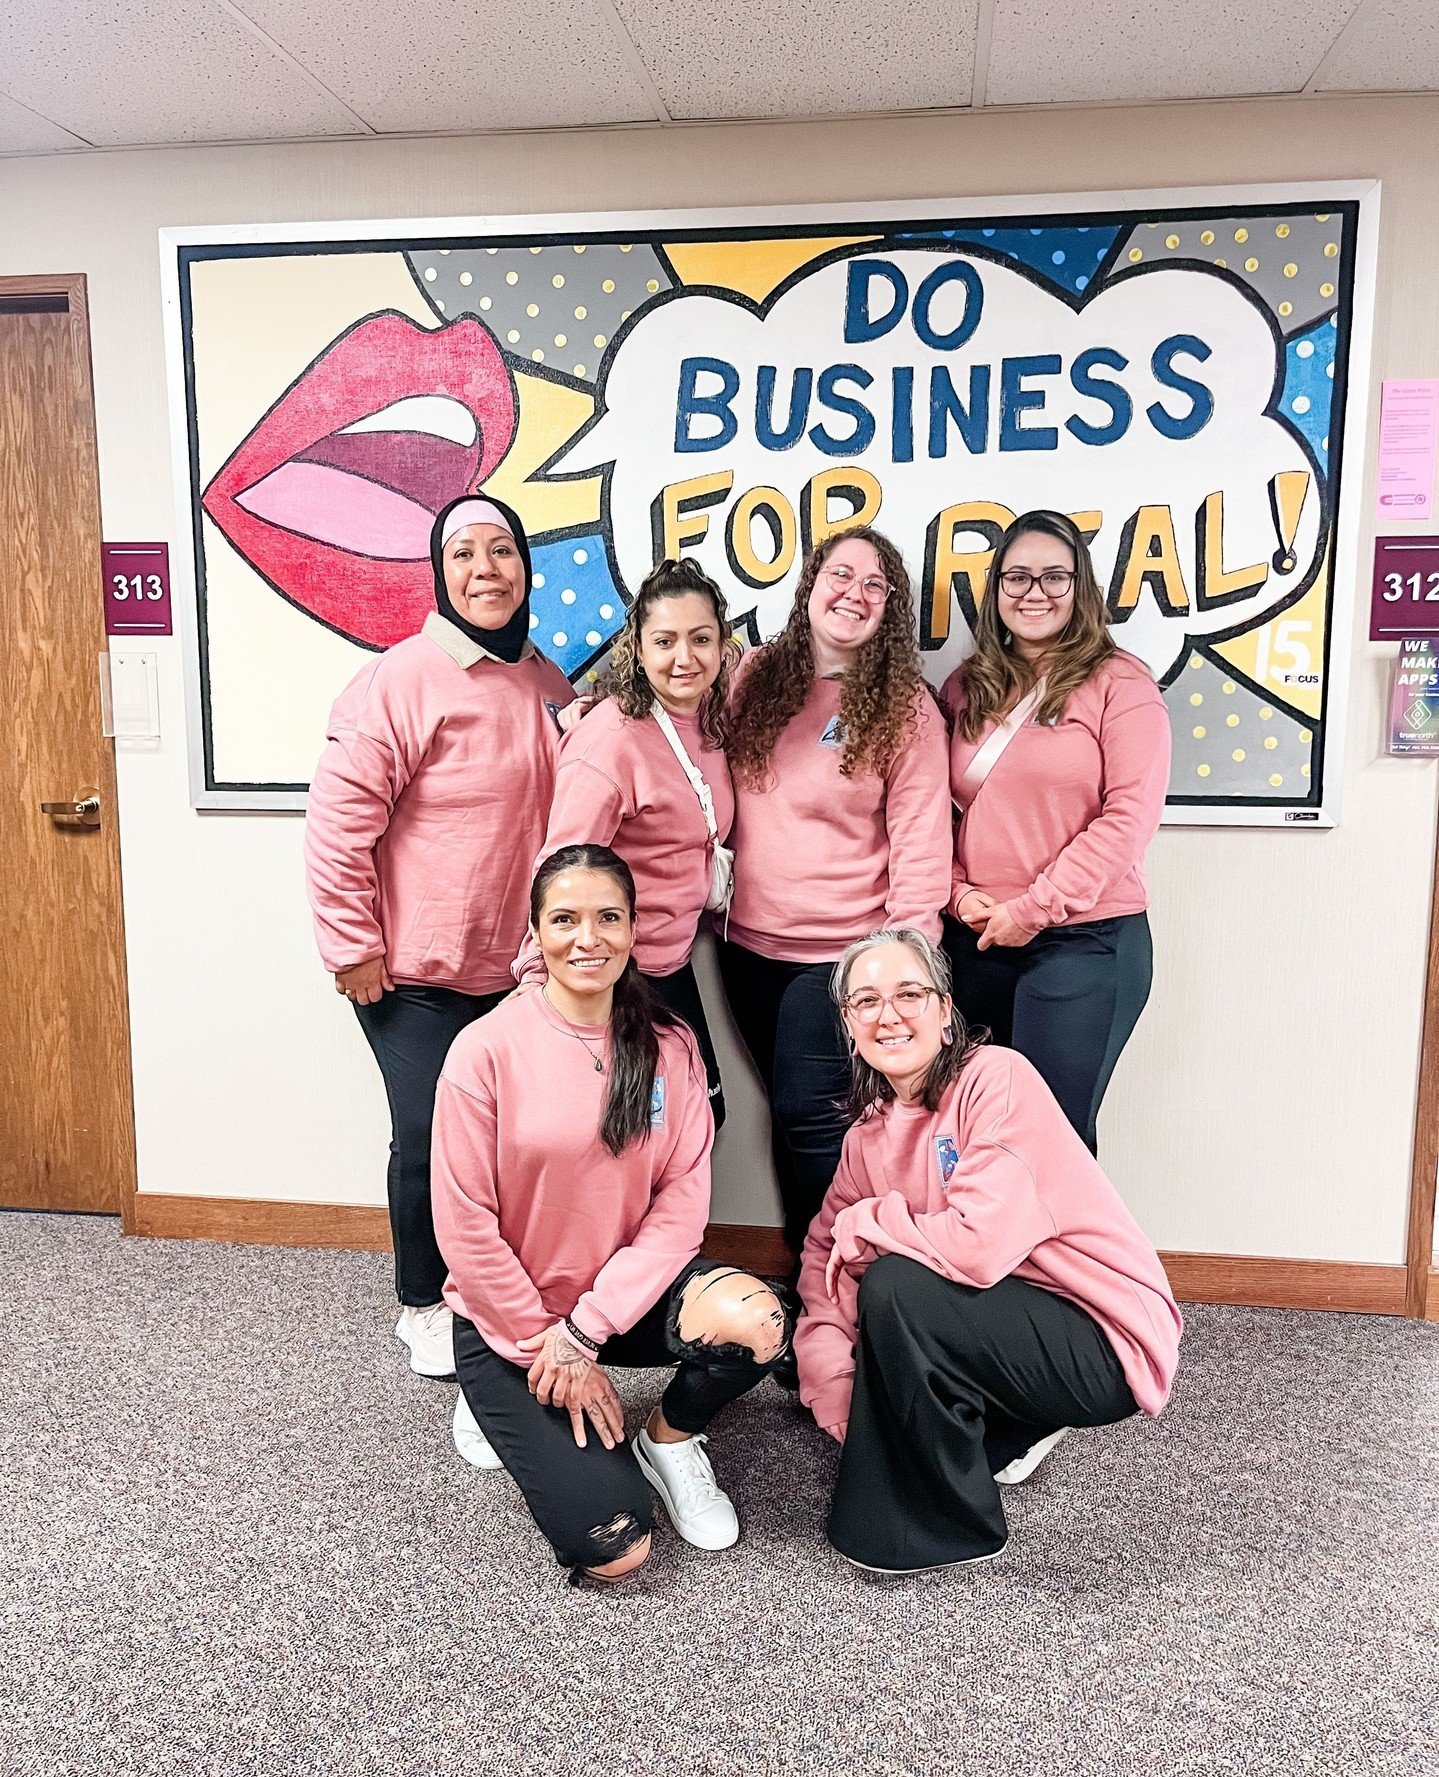 Count on Cohort VIII to show up in style to SCC's Perk Up Thursday! 🌸 Their entrepreneurship center is an incredible partner to ECHO and our small business programs.